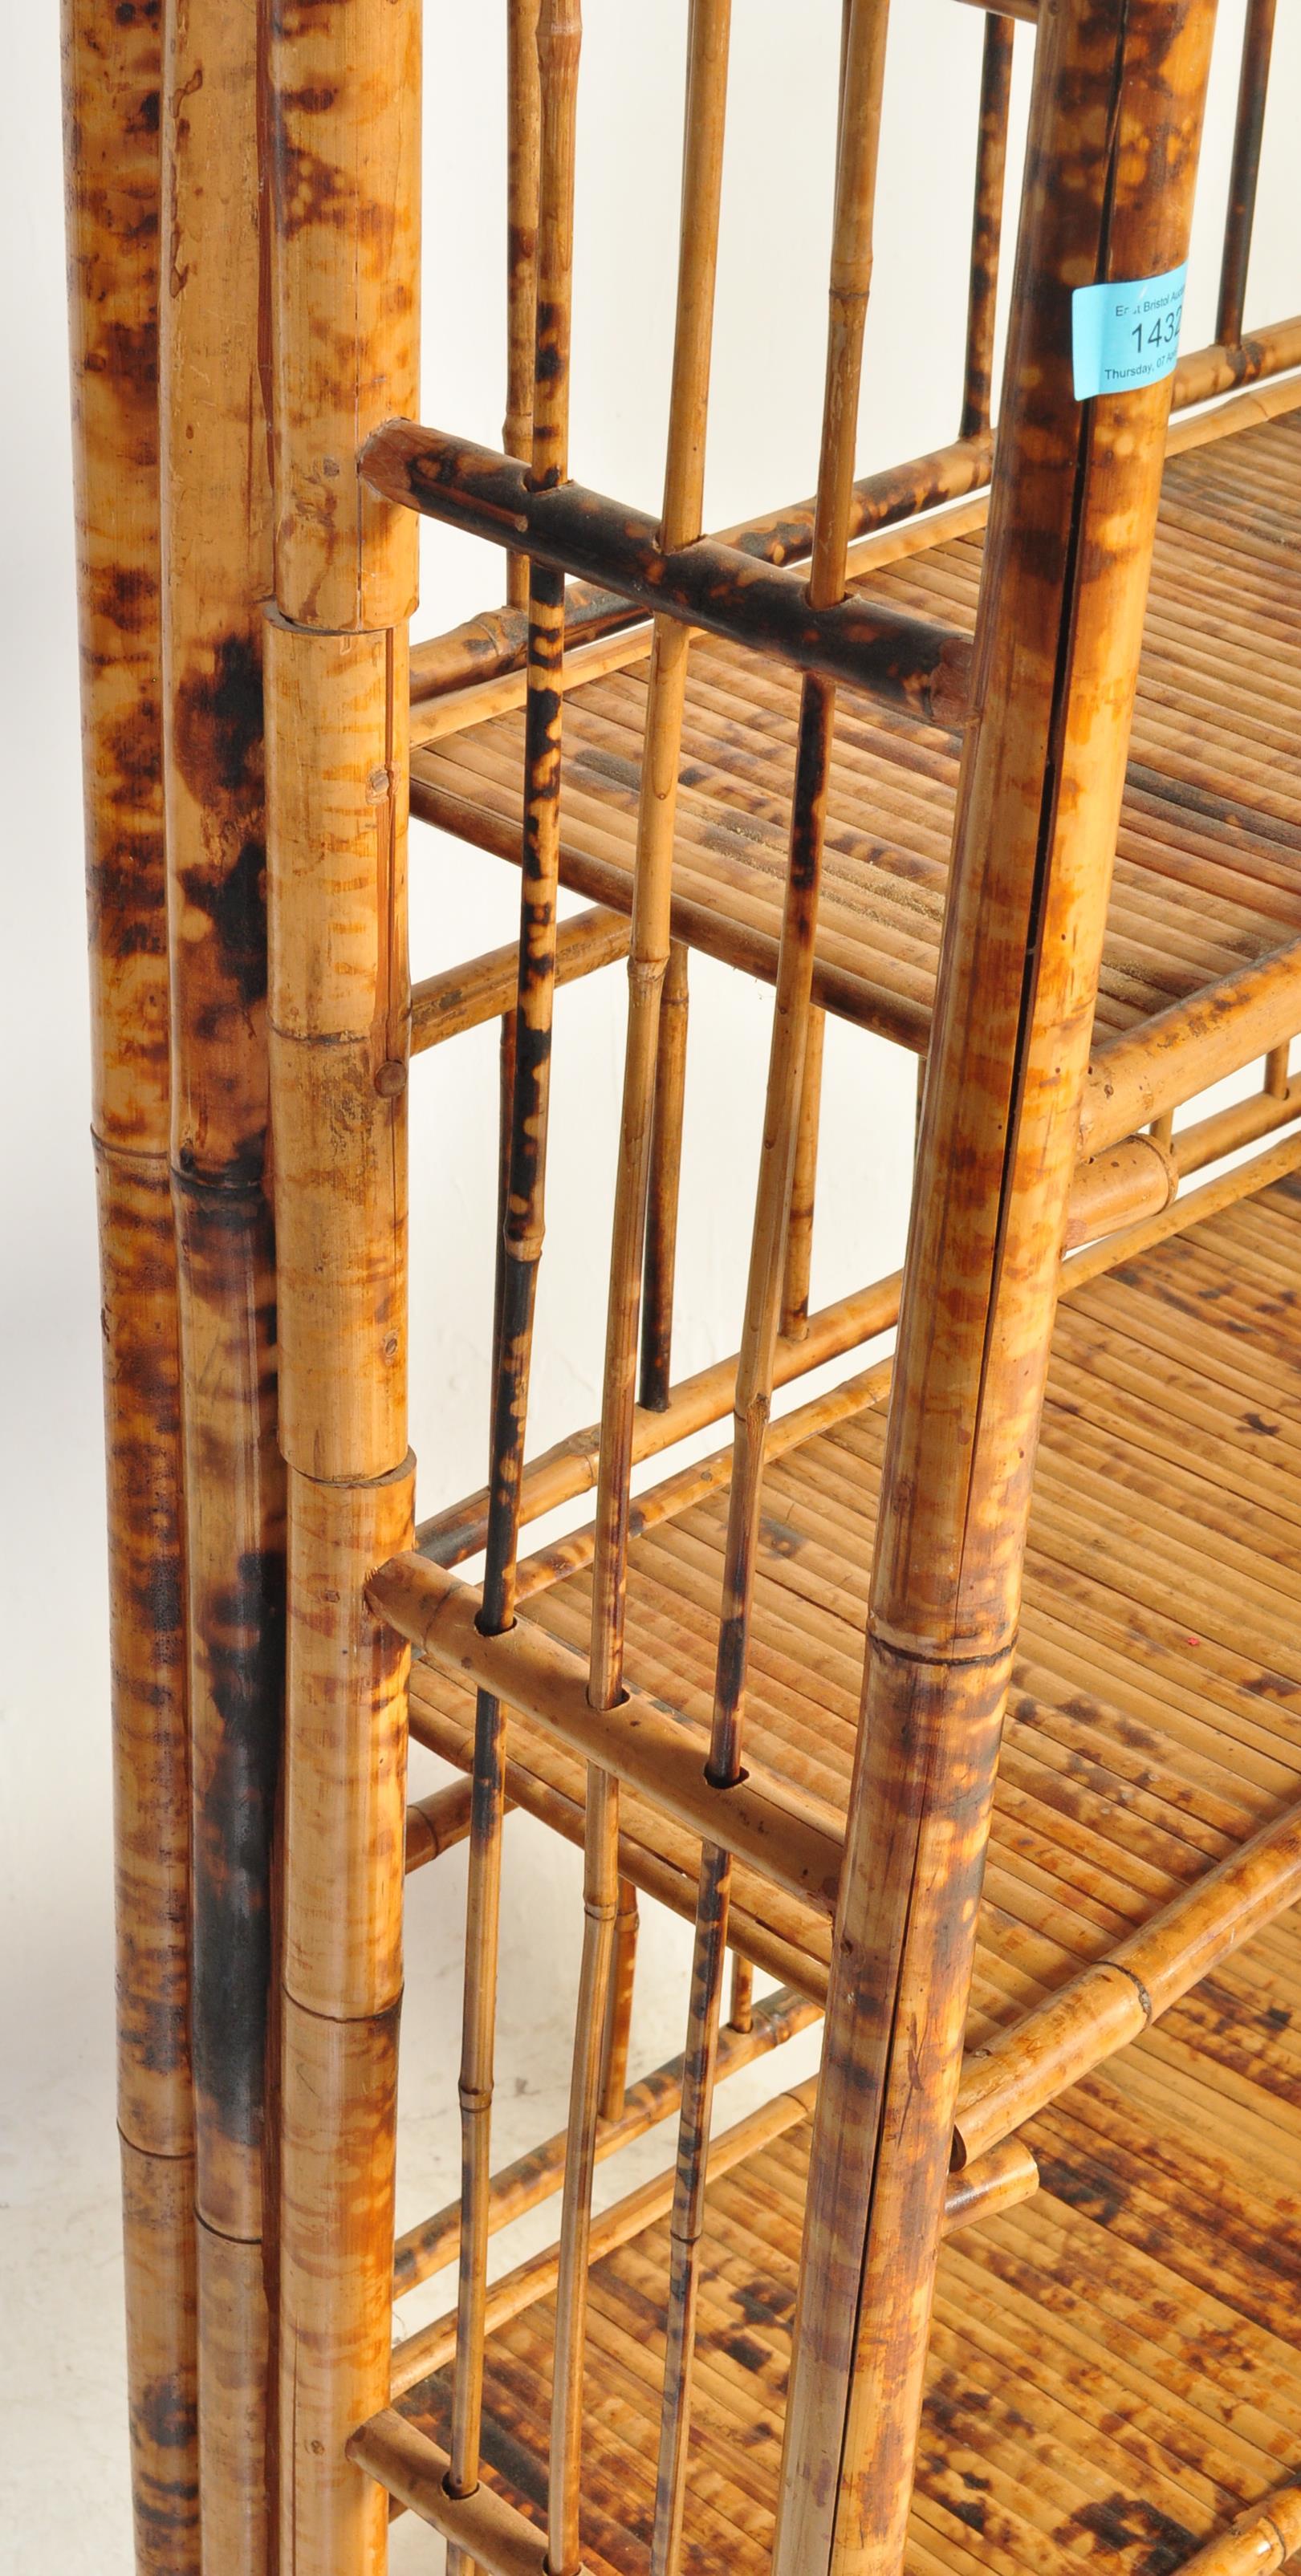 EARLY 20TH CENTURY AESTHETIC MOVEMENT BAMBOO SHELVES - Image 4 of 6